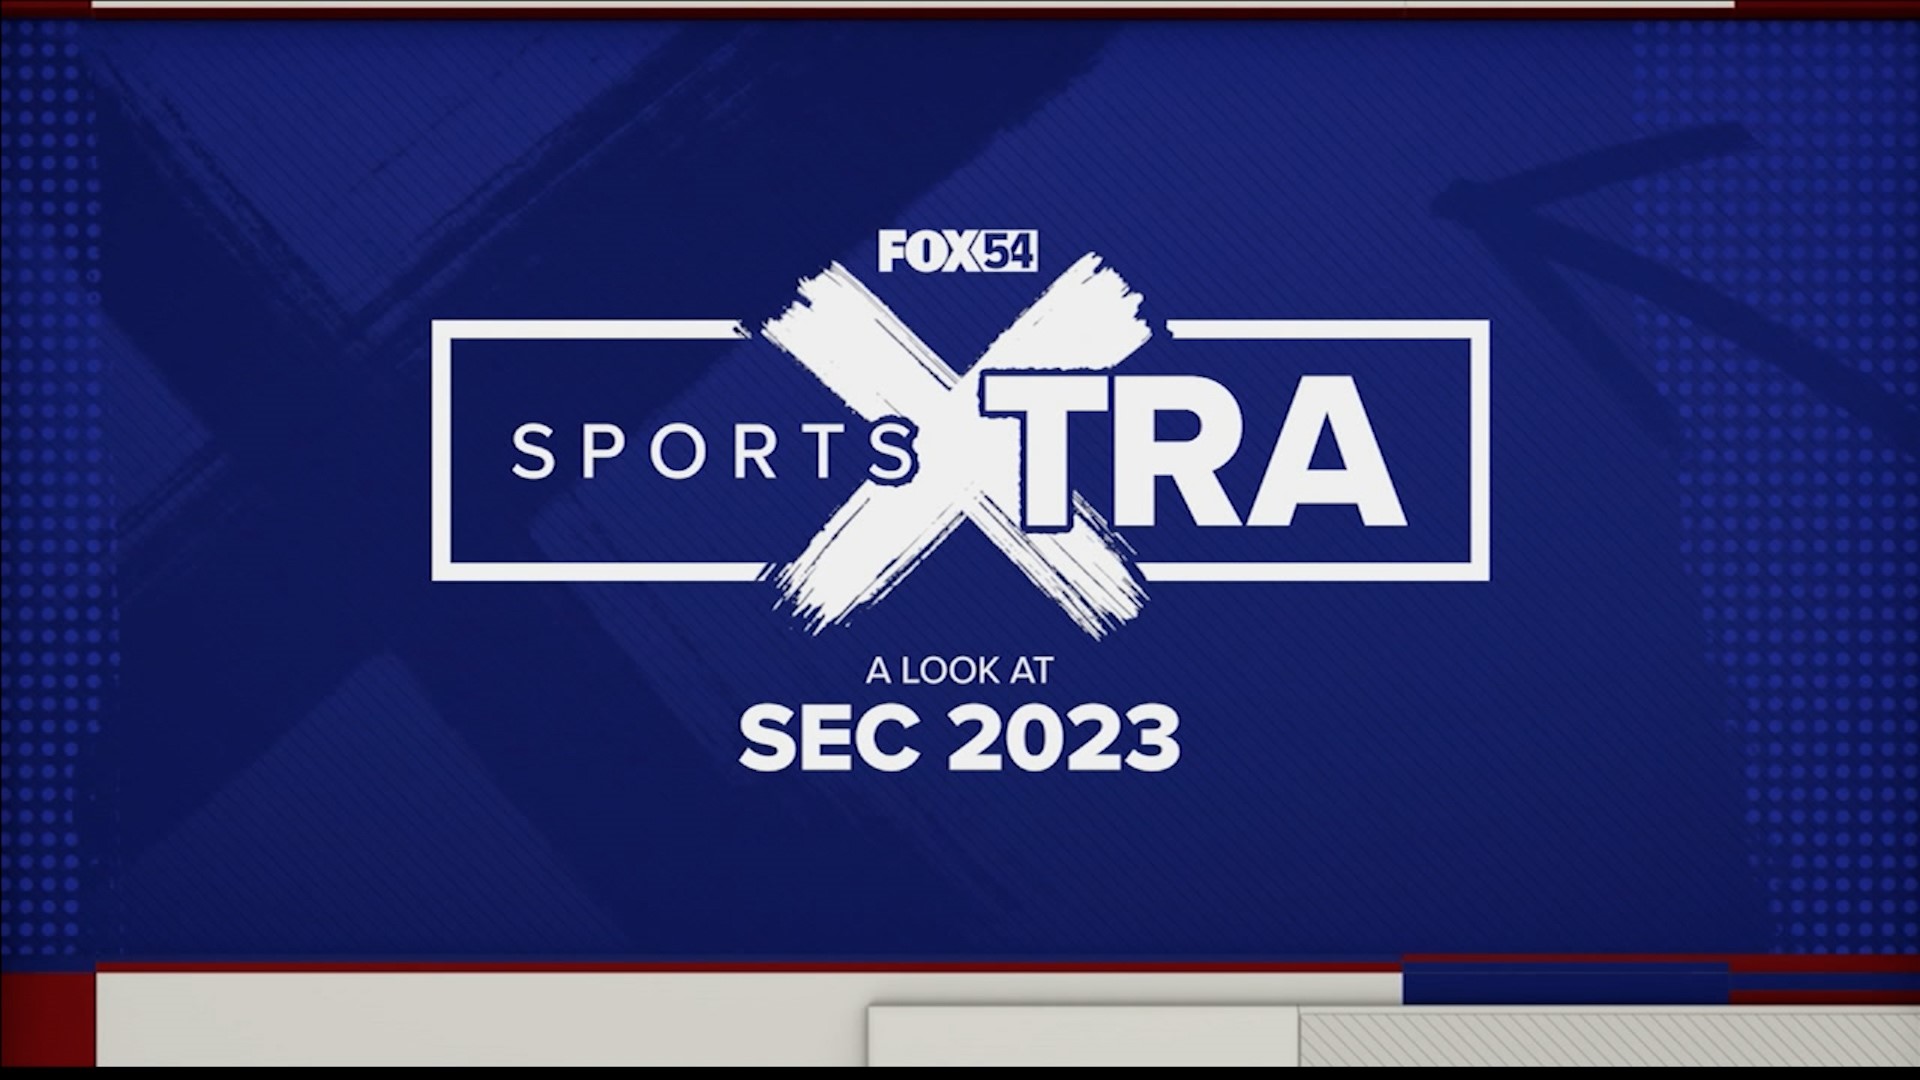 Another action packed season of SEC football will kickoff in just a few weeks. The FOX54 Sports Team of Mo Carter, Nick Kuzma & Simon Williams provided an early look